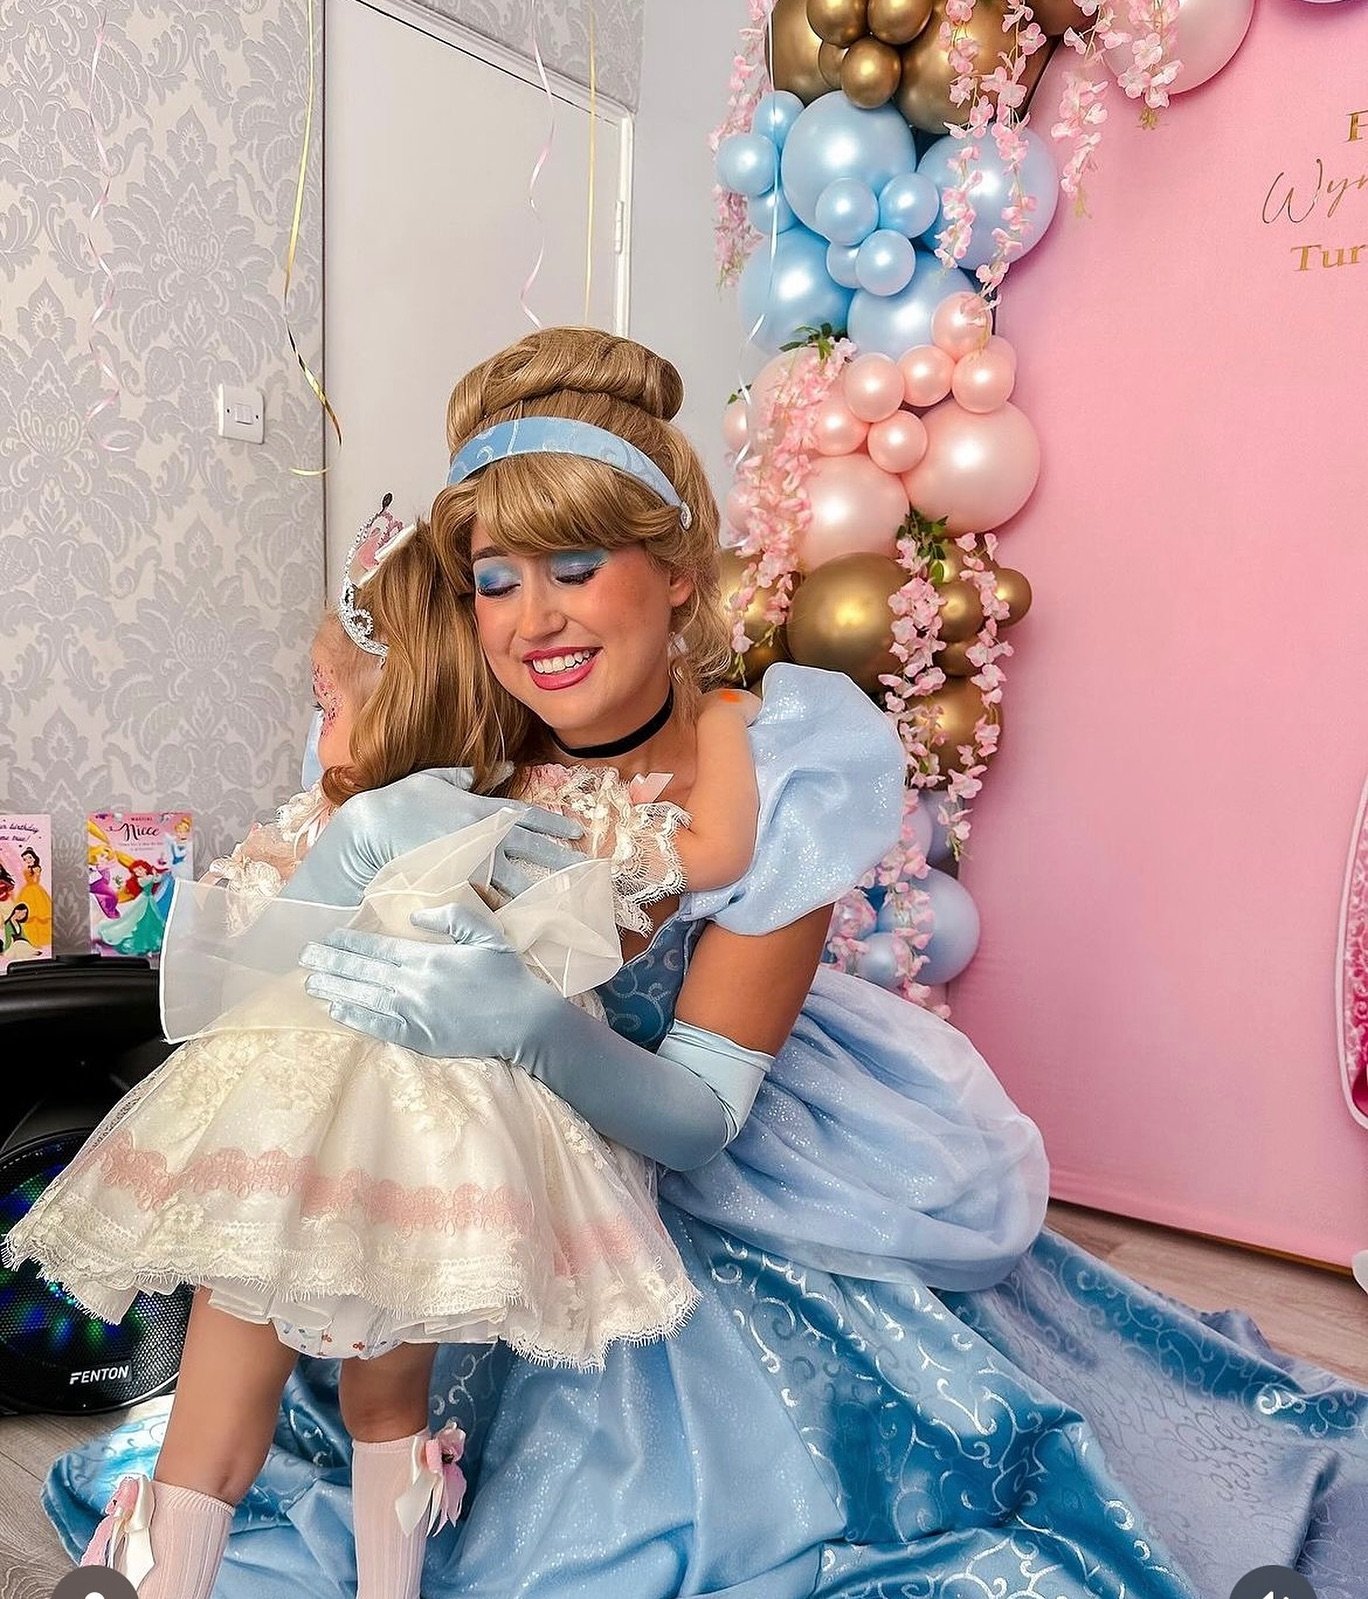 It&rsquo;s hug a friend Friday here at MPP! 🤗
Invite one of our princesses to your party or event, whatever the celebration! click the link in our bio to access our website, events or booking form and any questions you can always pop us a message💖
